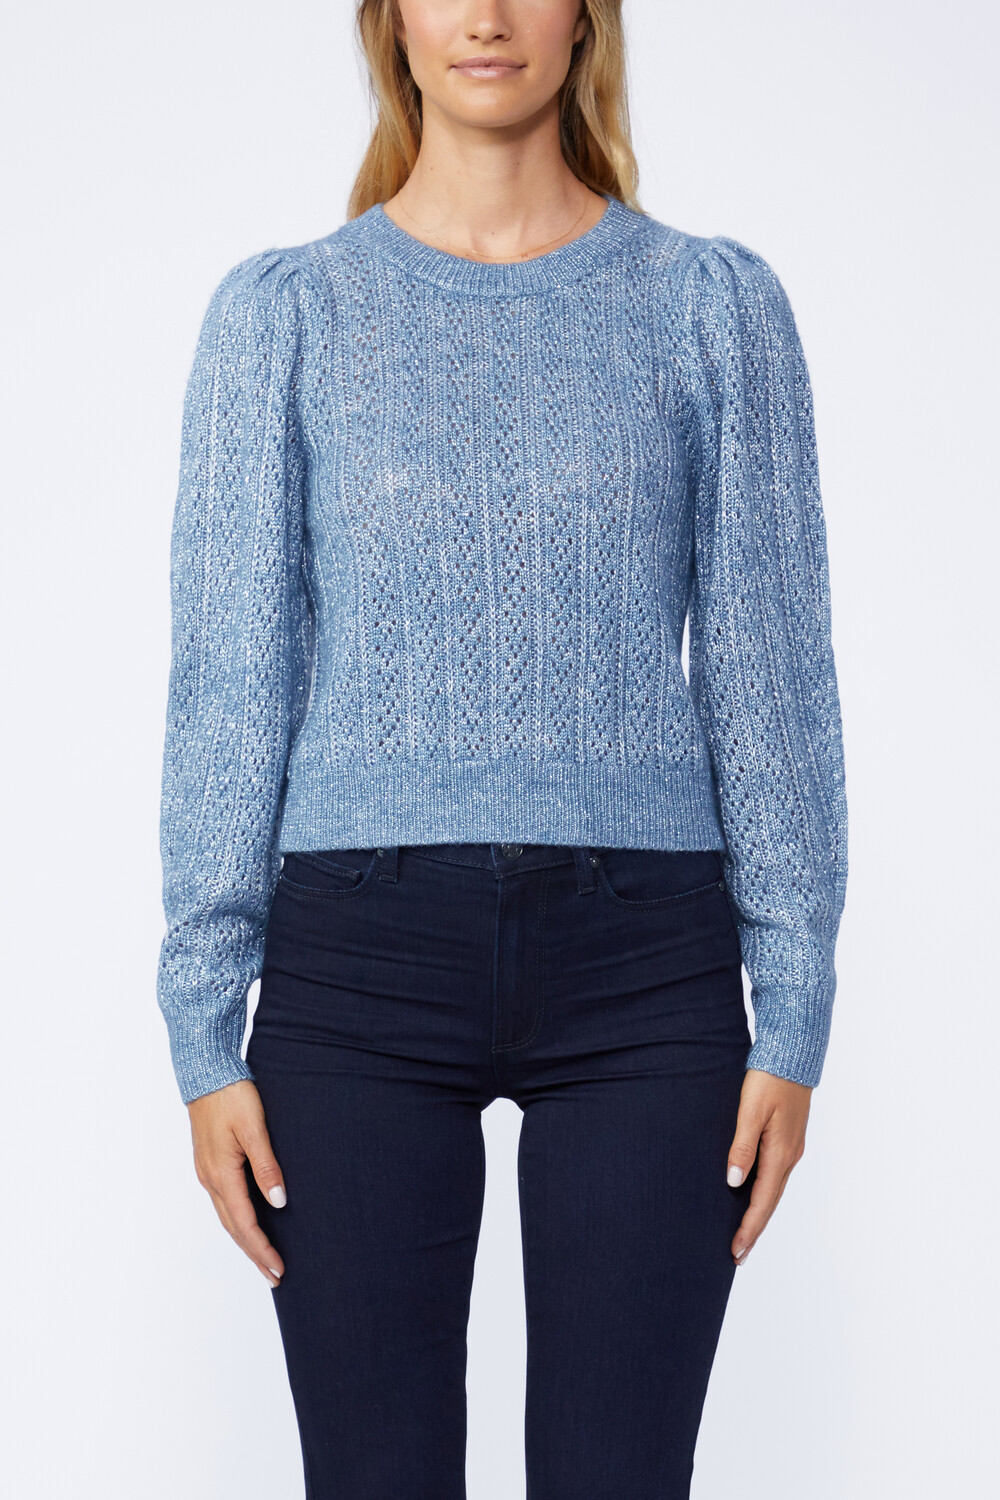 Paige Athena Sweater in Moondust Blue/ Silver